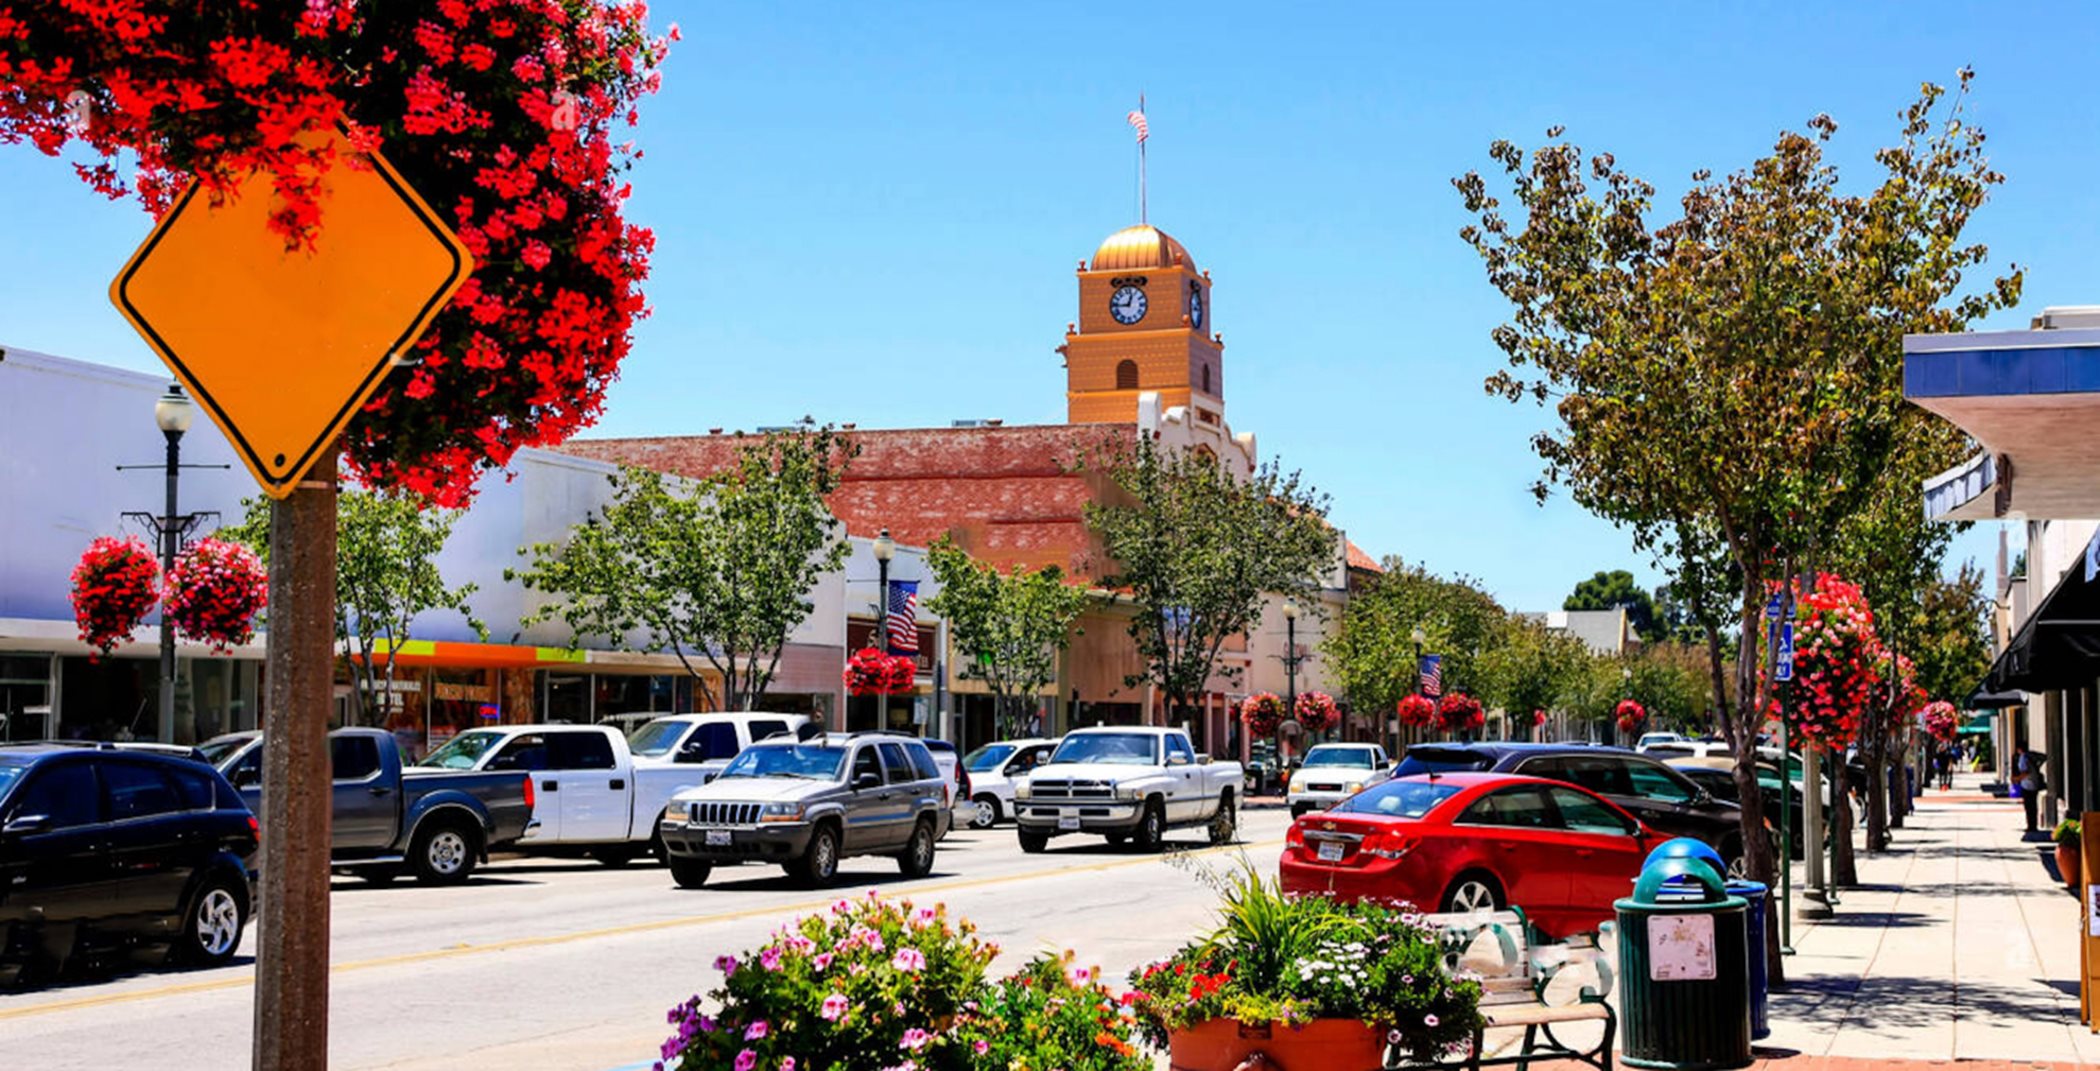 View of the downtown area in Santa Paula